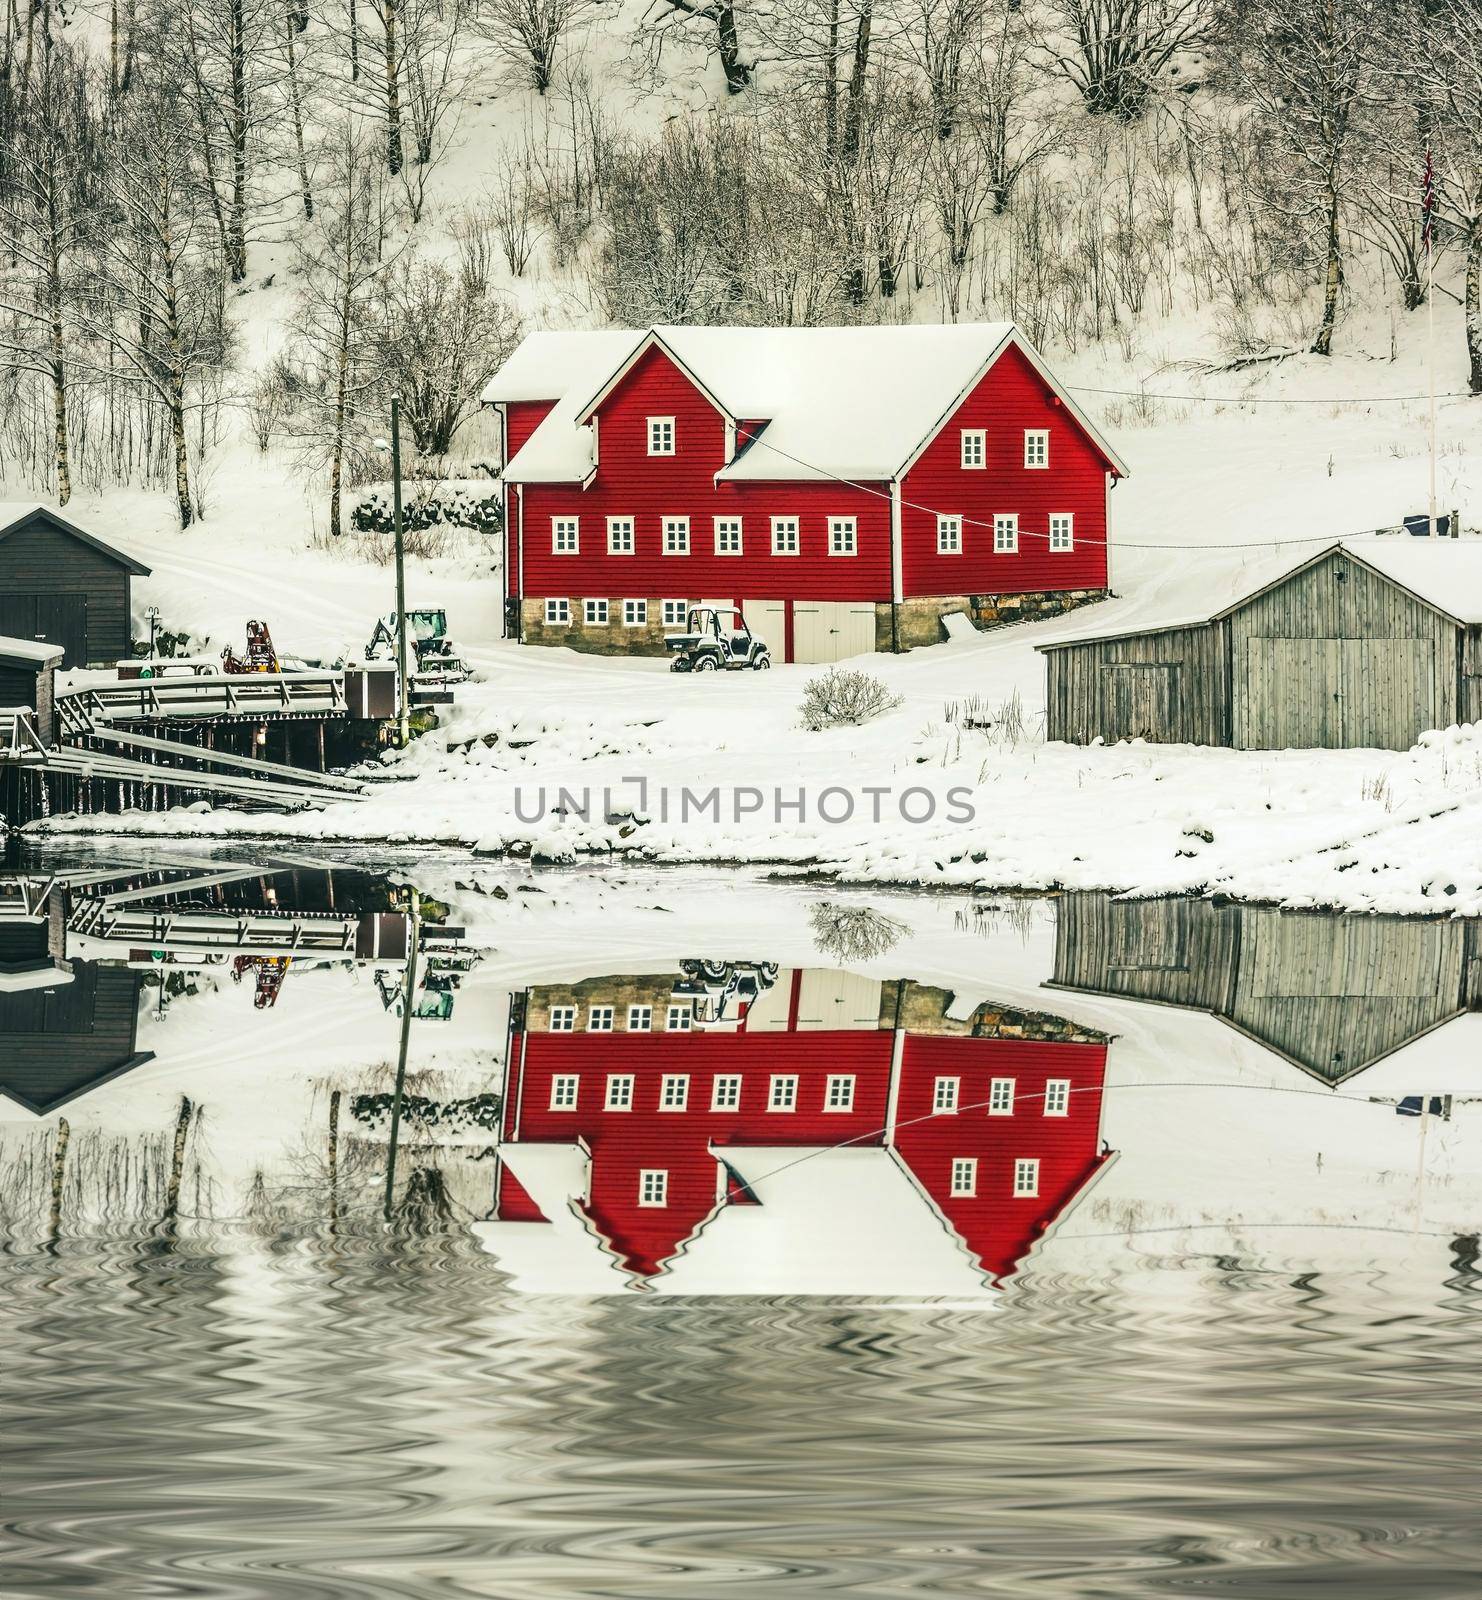 wooden houses on the banks of the Norwegian fjord with reflection in water